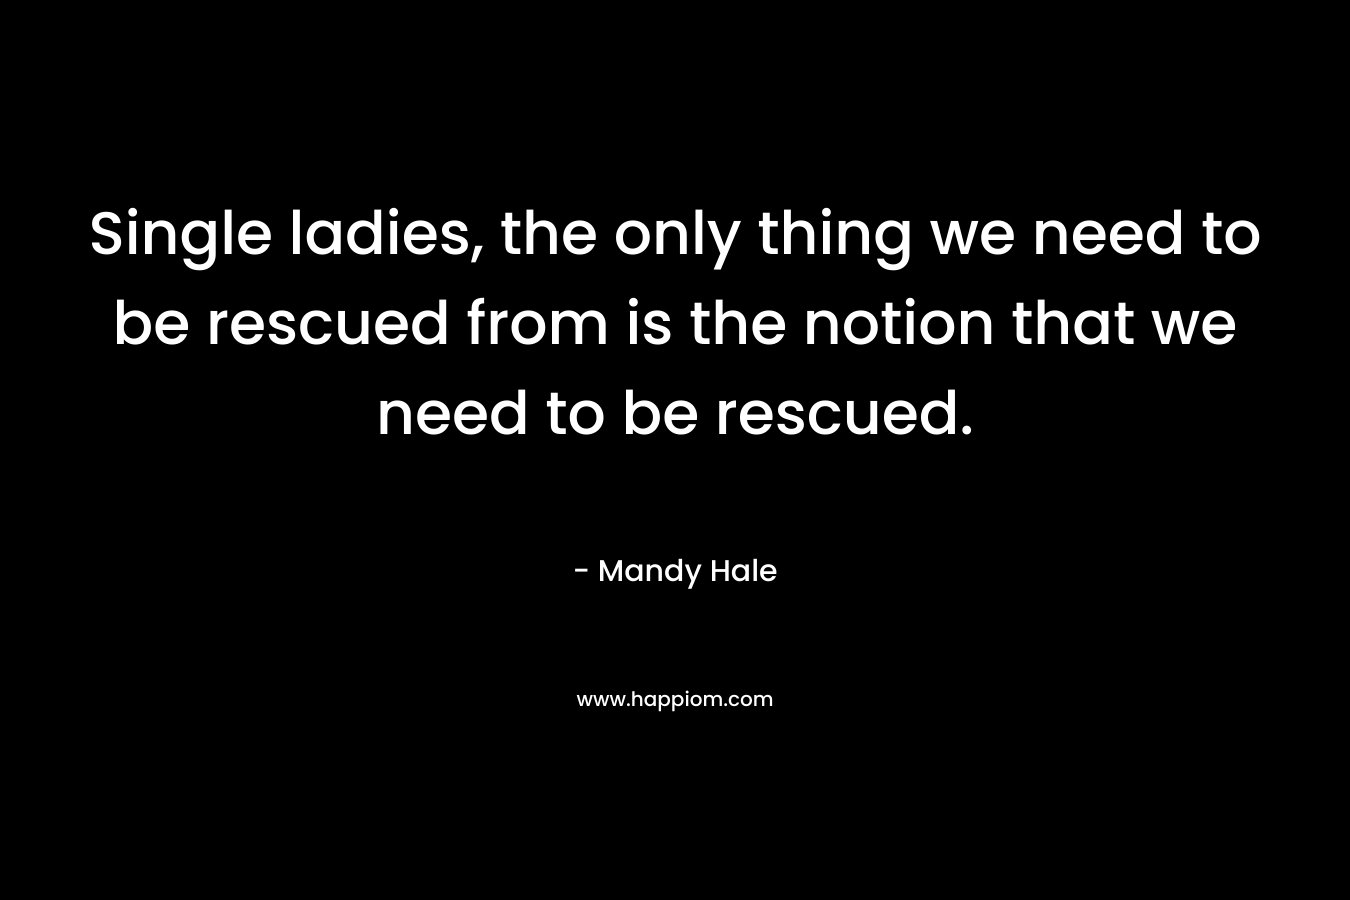 Single ladies, the only thing we need to be rescued from is the notion that we need to be rescued. – Mandy Hale